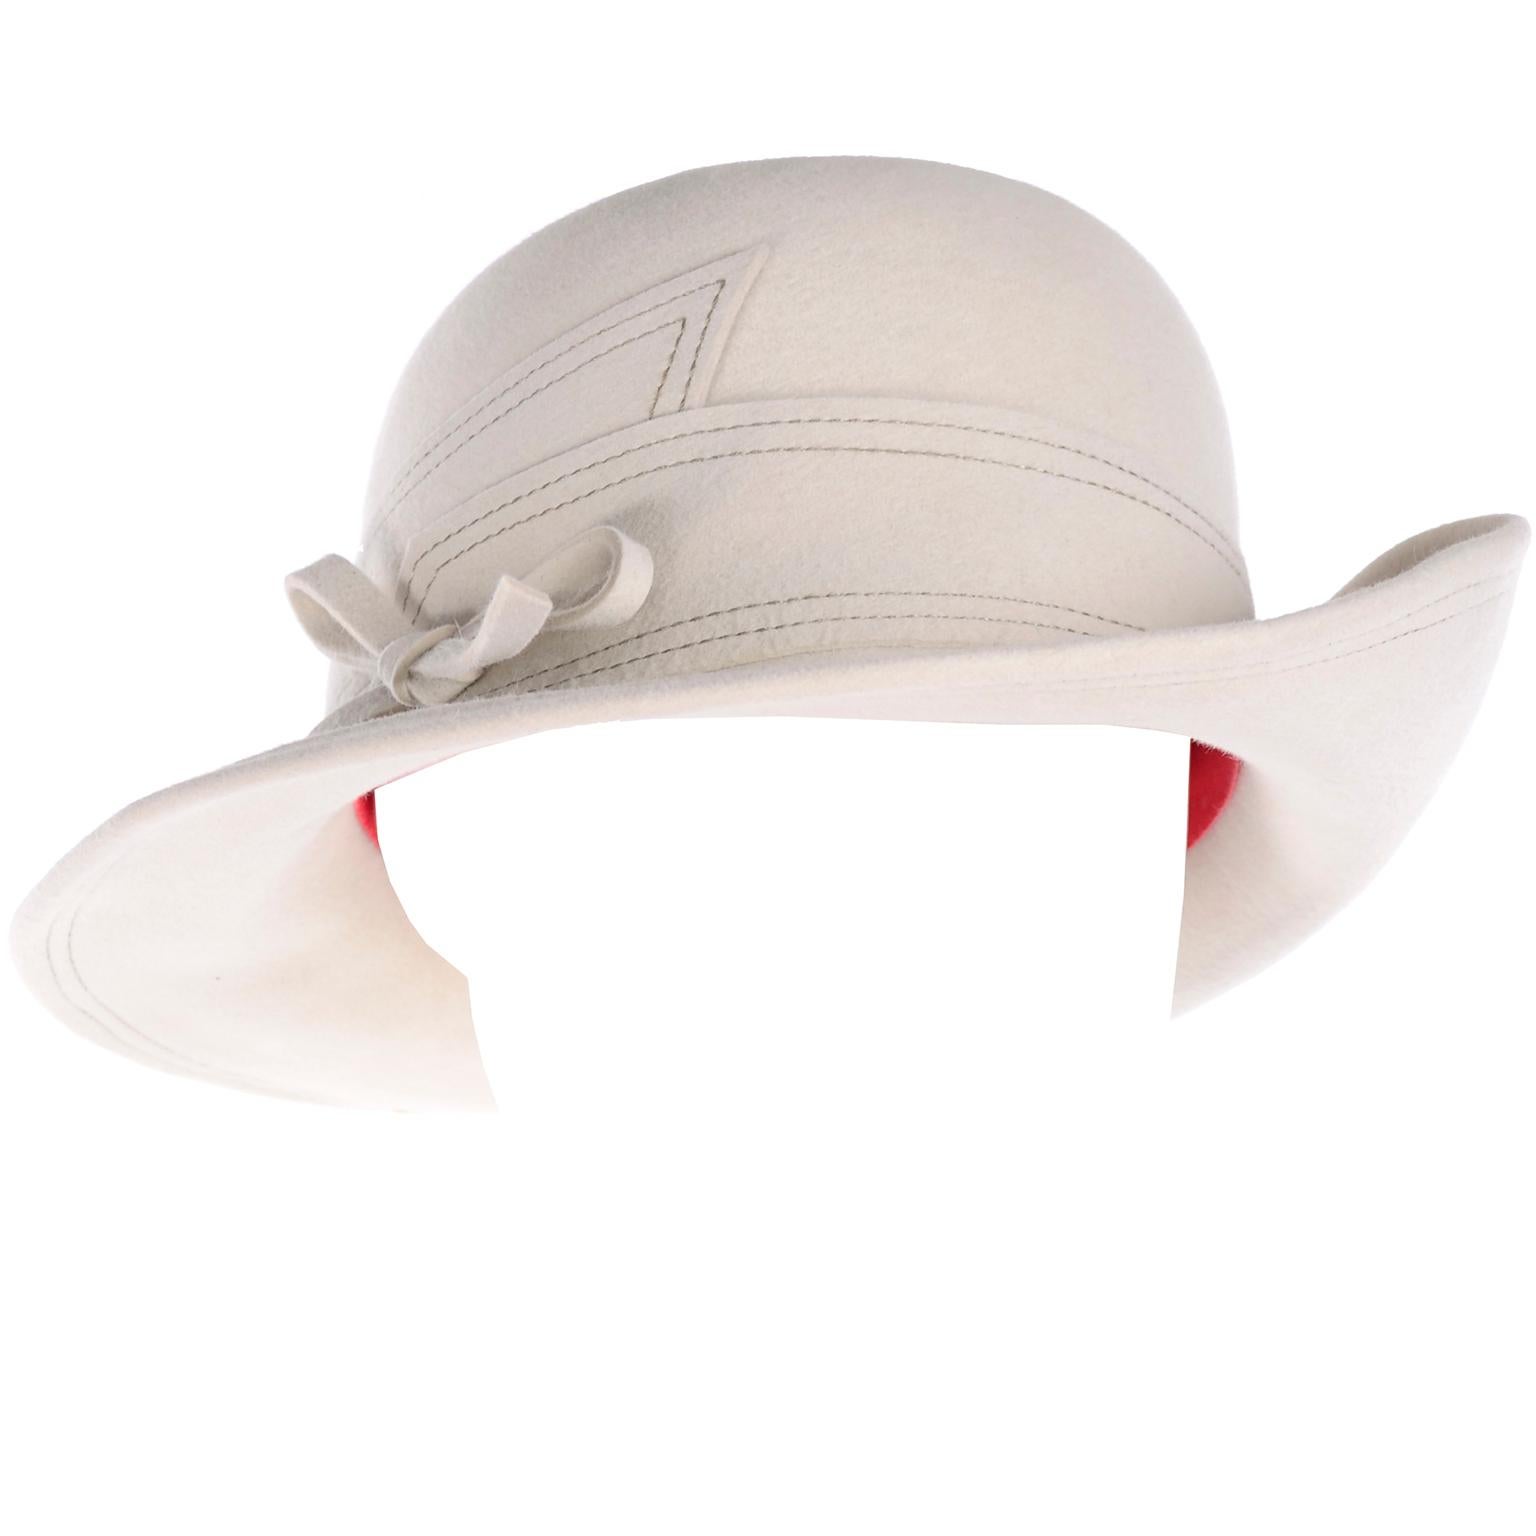 This beautiful vintage cream wool hat from Adolfo was purchased at Marshall Field in the 1970's.  The hat has incredible contrasting brown topstitching and a pretty bow. One side has an upturned brim that is secured with a thread. The hat measures